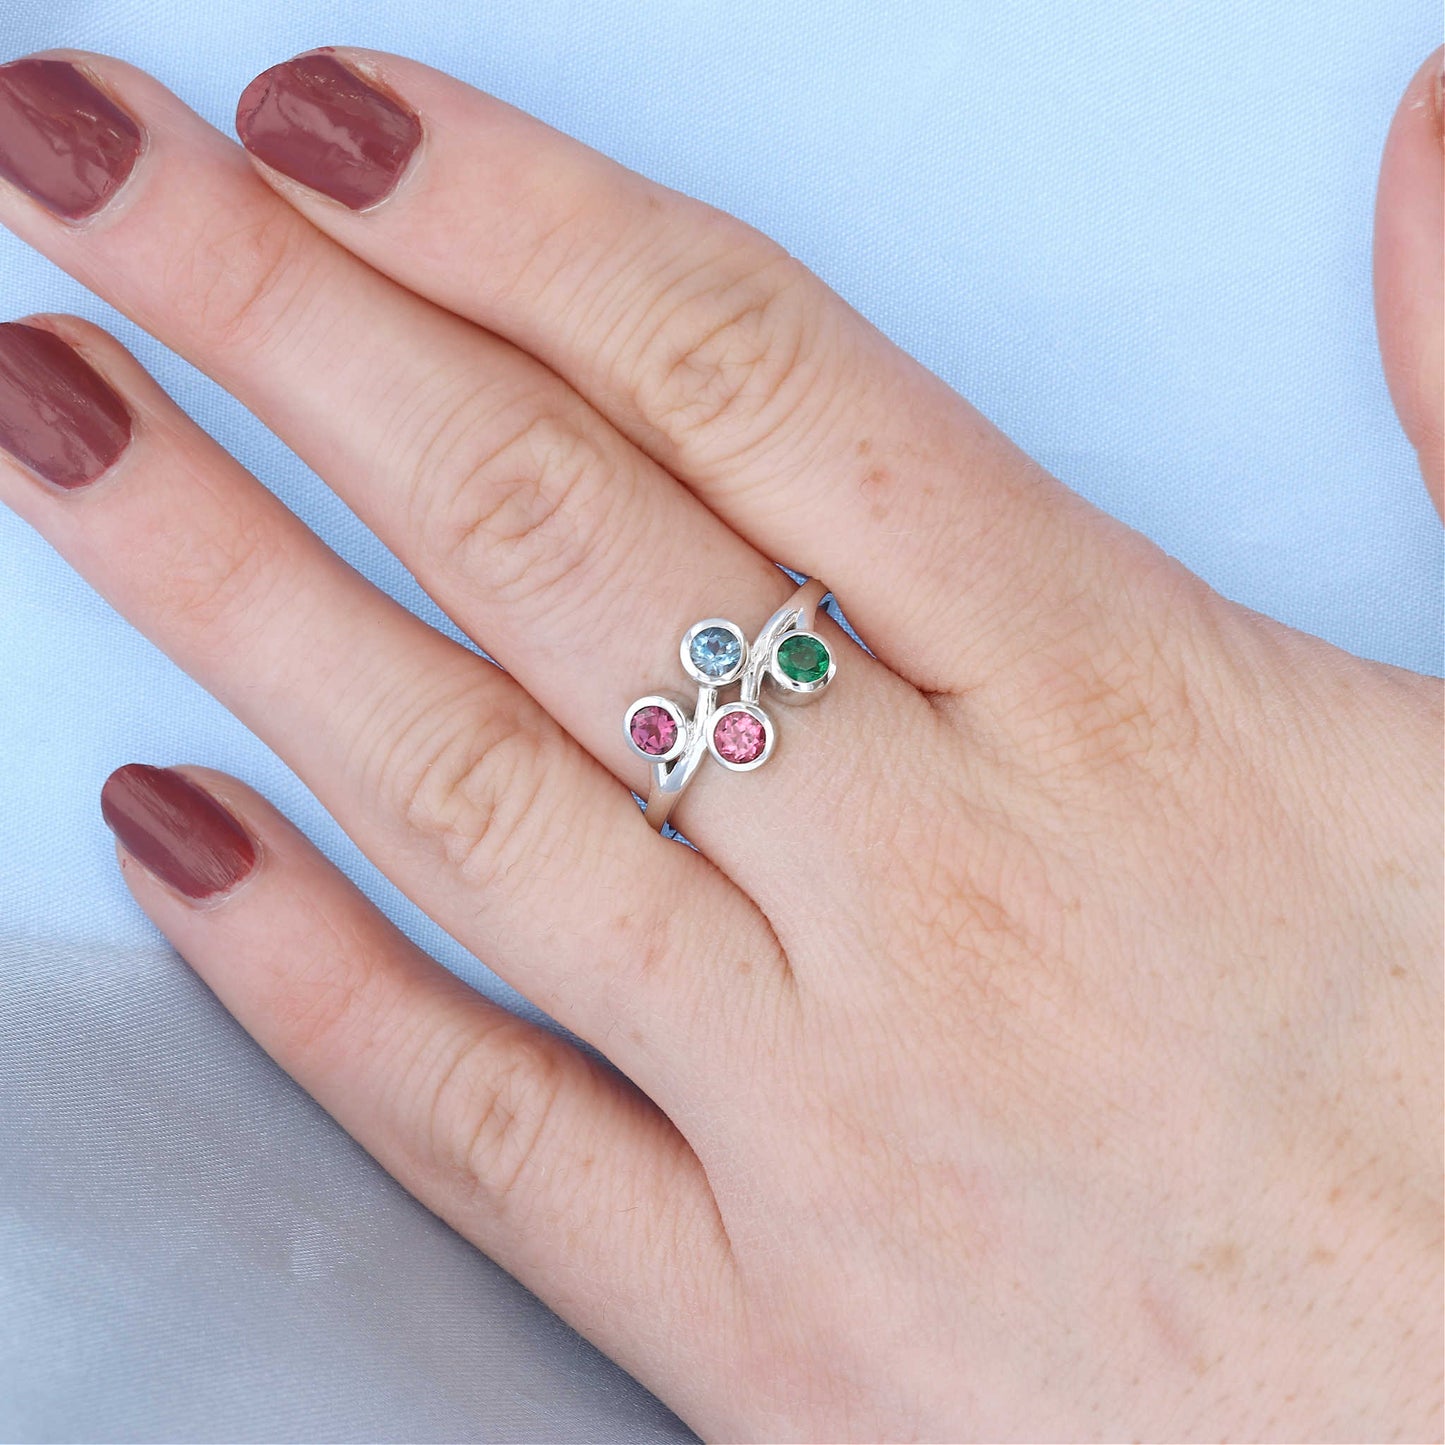 Birthstone Family Branch Ring on a Finger